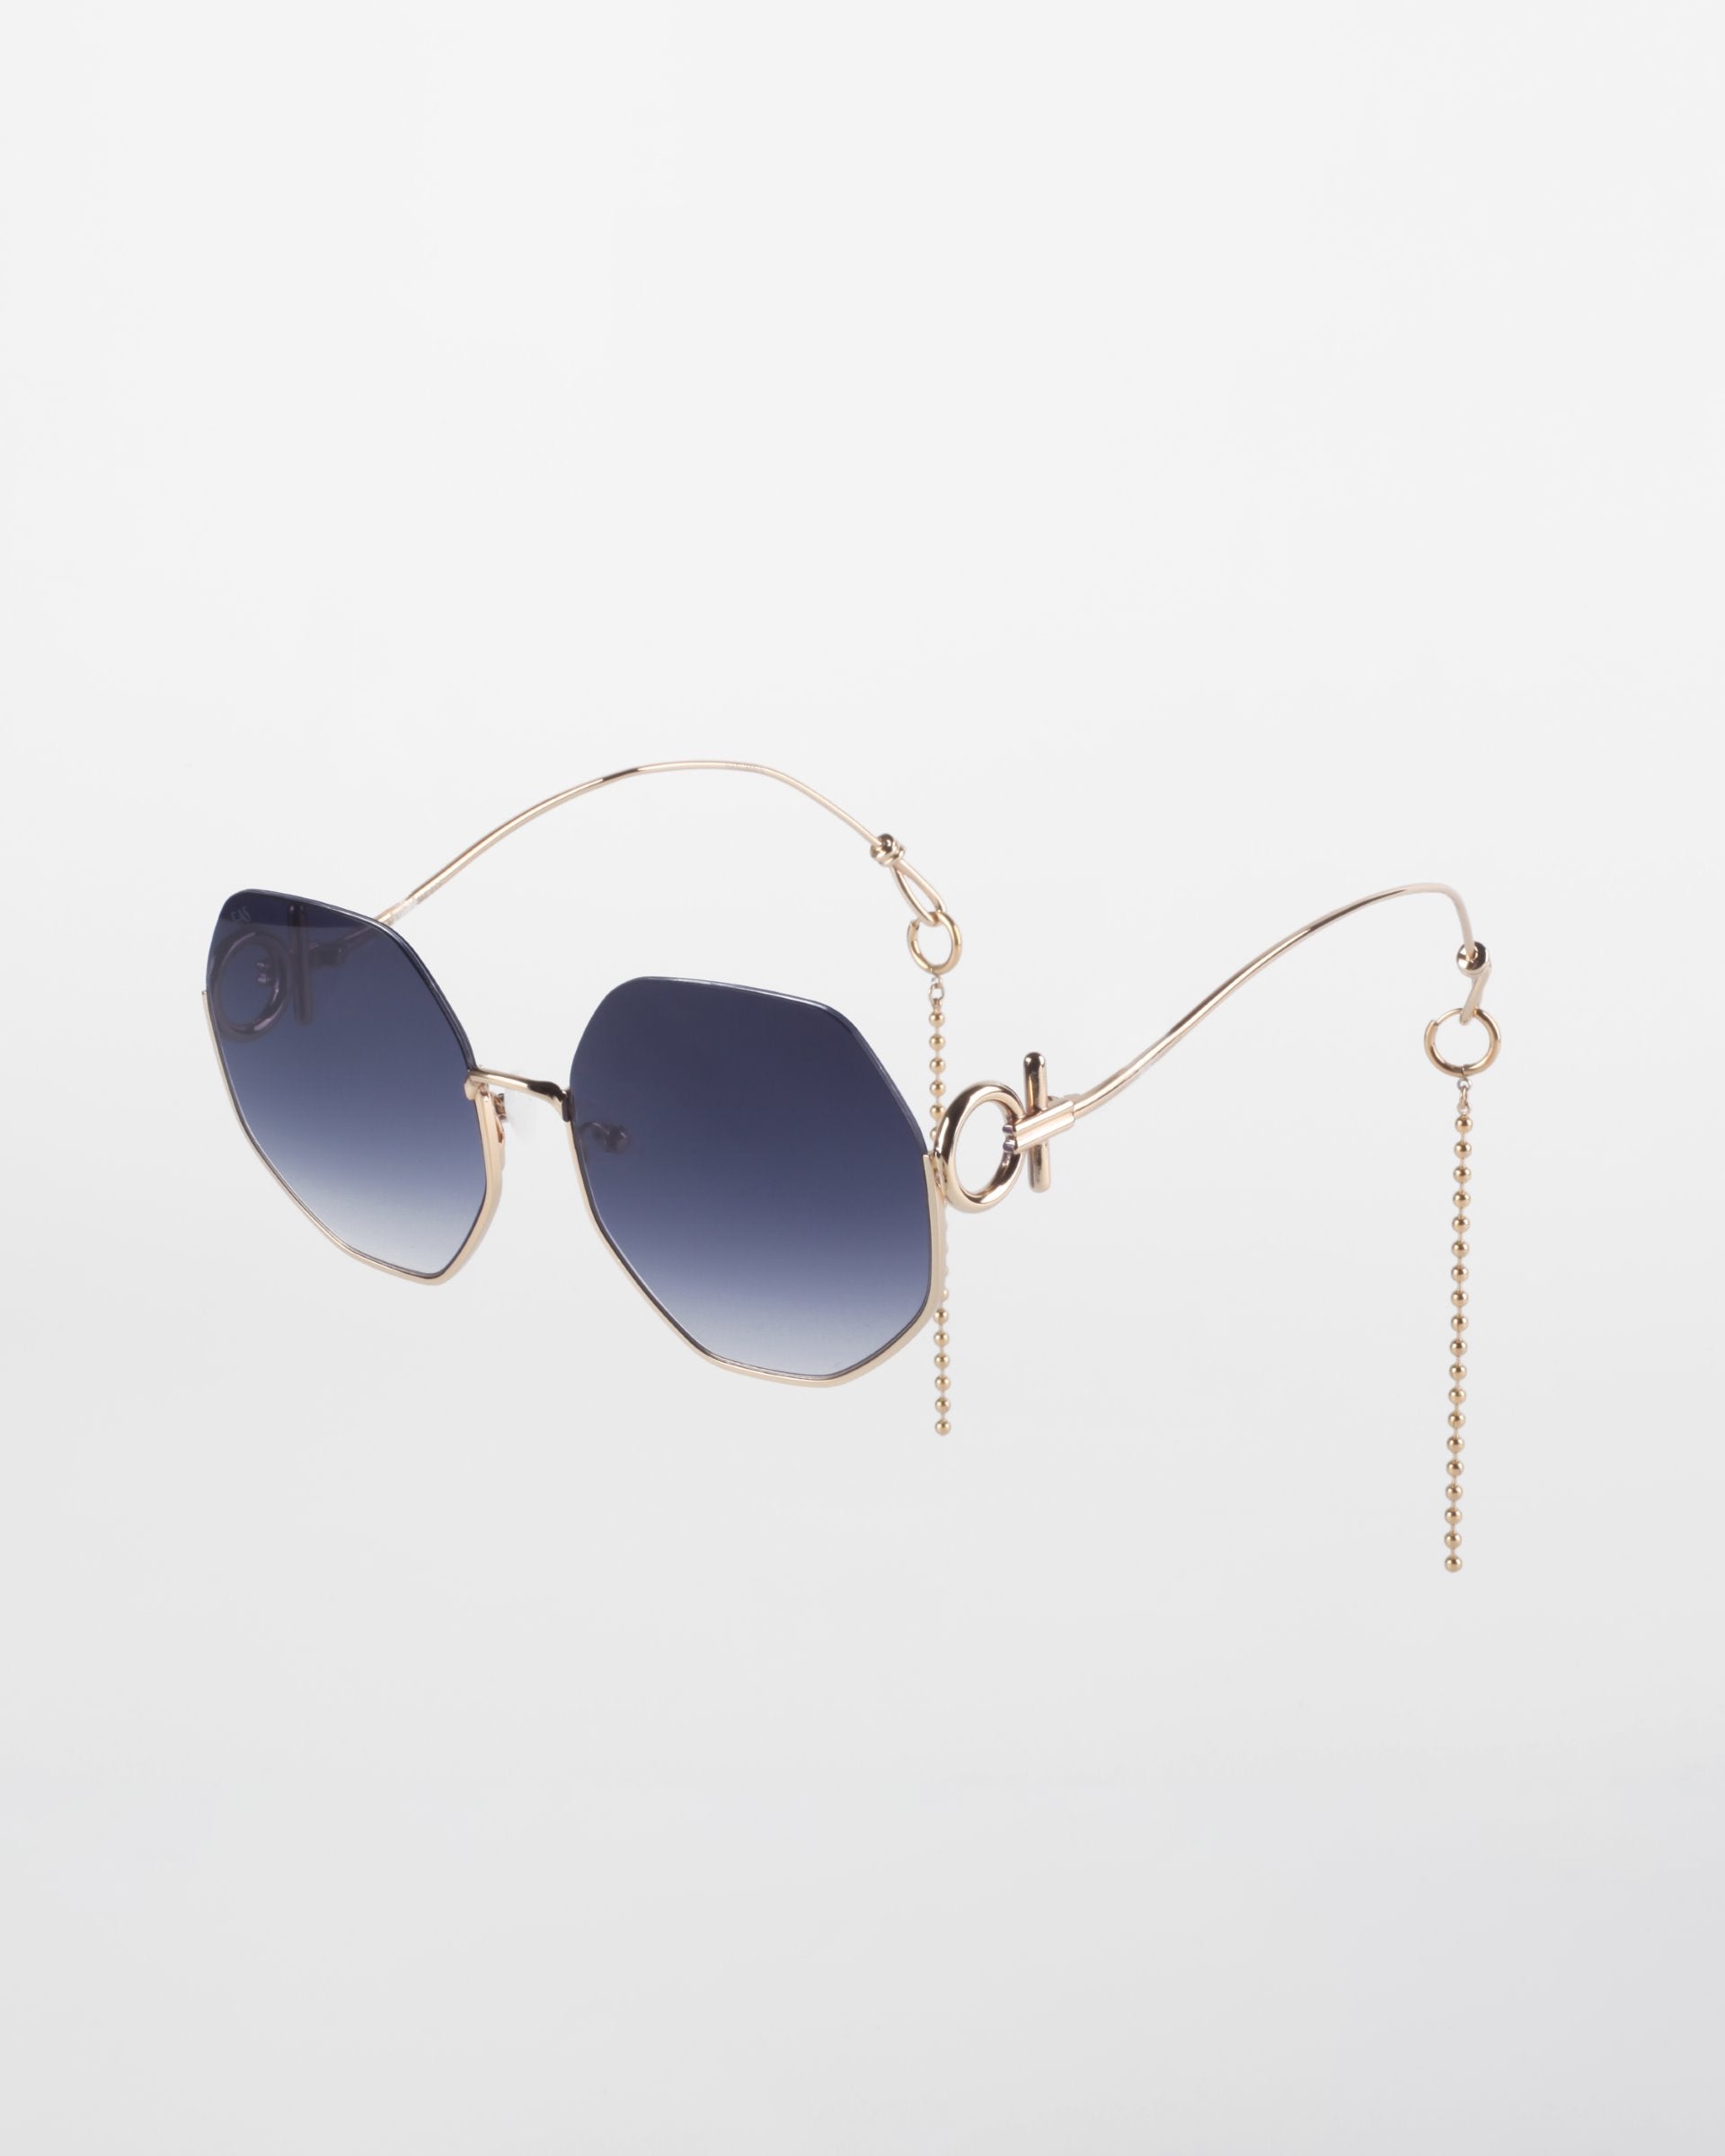 Stylish sunglasses with octagonal, gradient lenses and 18-karat gold-plated frames featuring unique, curved temples and chain accents on a plain white background. Limited Edition Palace by For Art's Sake®.